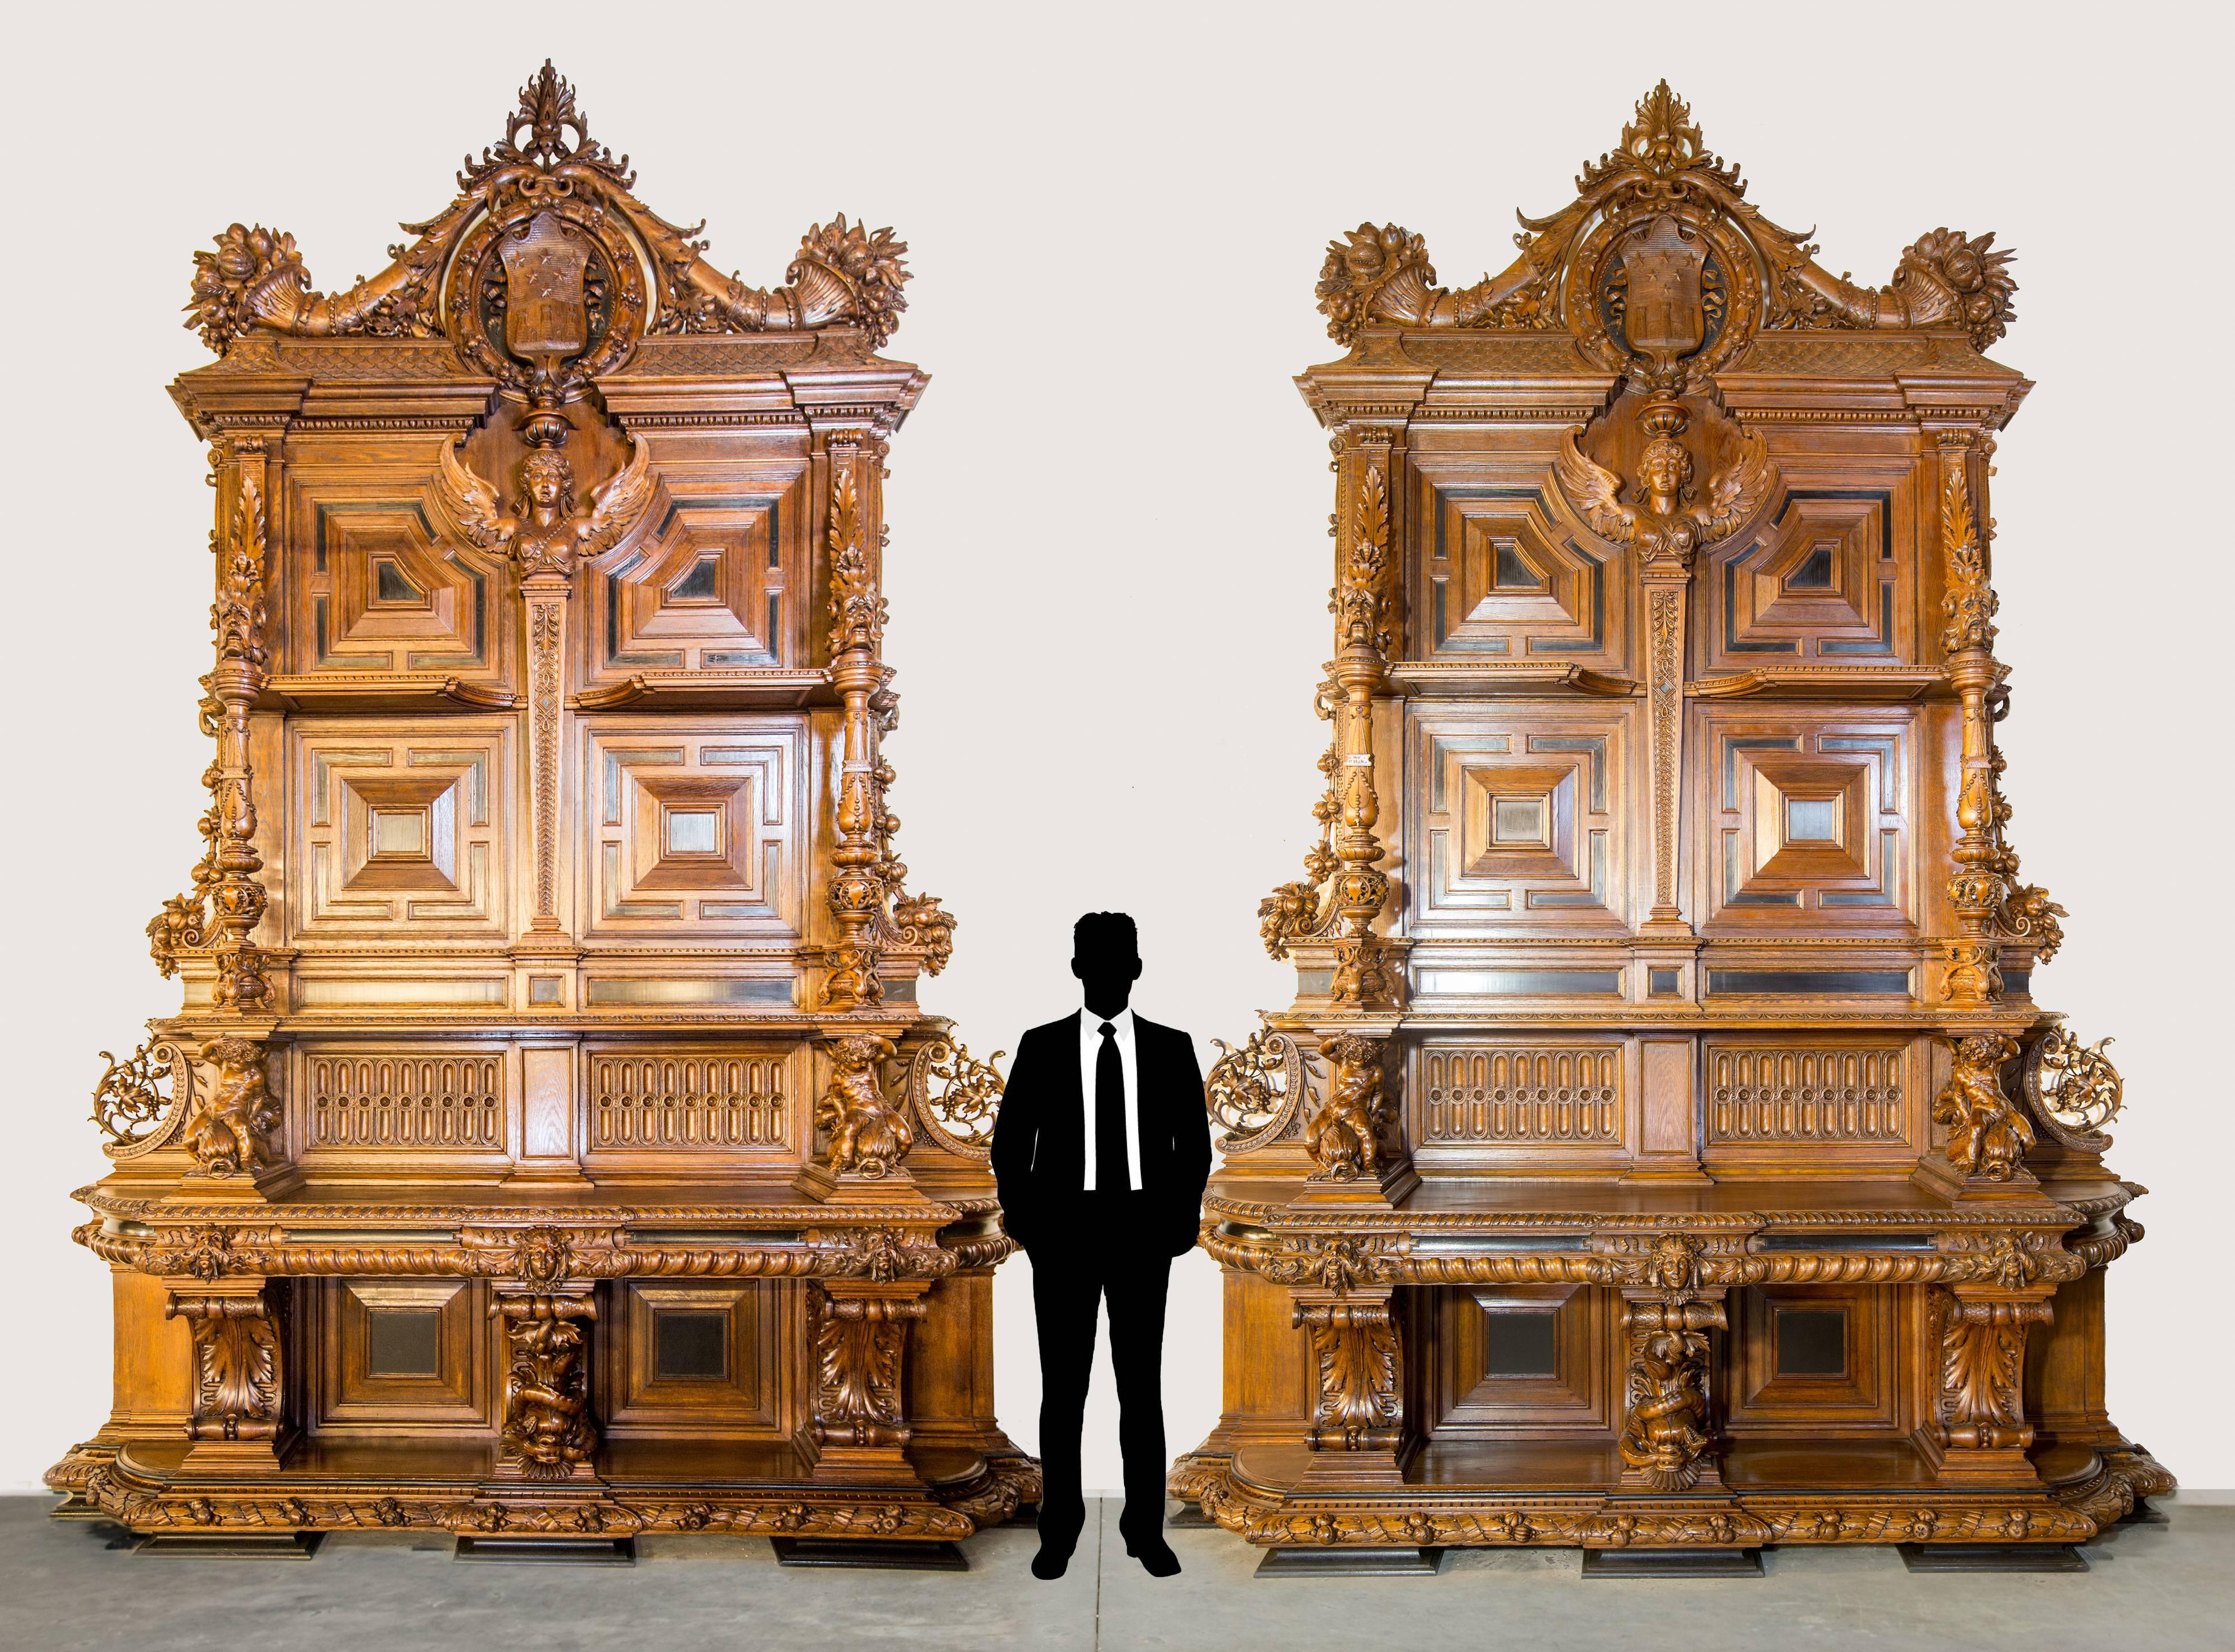 Monumental pair of console cabinets dating to the late 19th century. 

The consoles come with their fully documented history. 
Designed in 1879, manufactured between 1880 and 1882 and finished in 1882. 

Consoles are made up of six individual